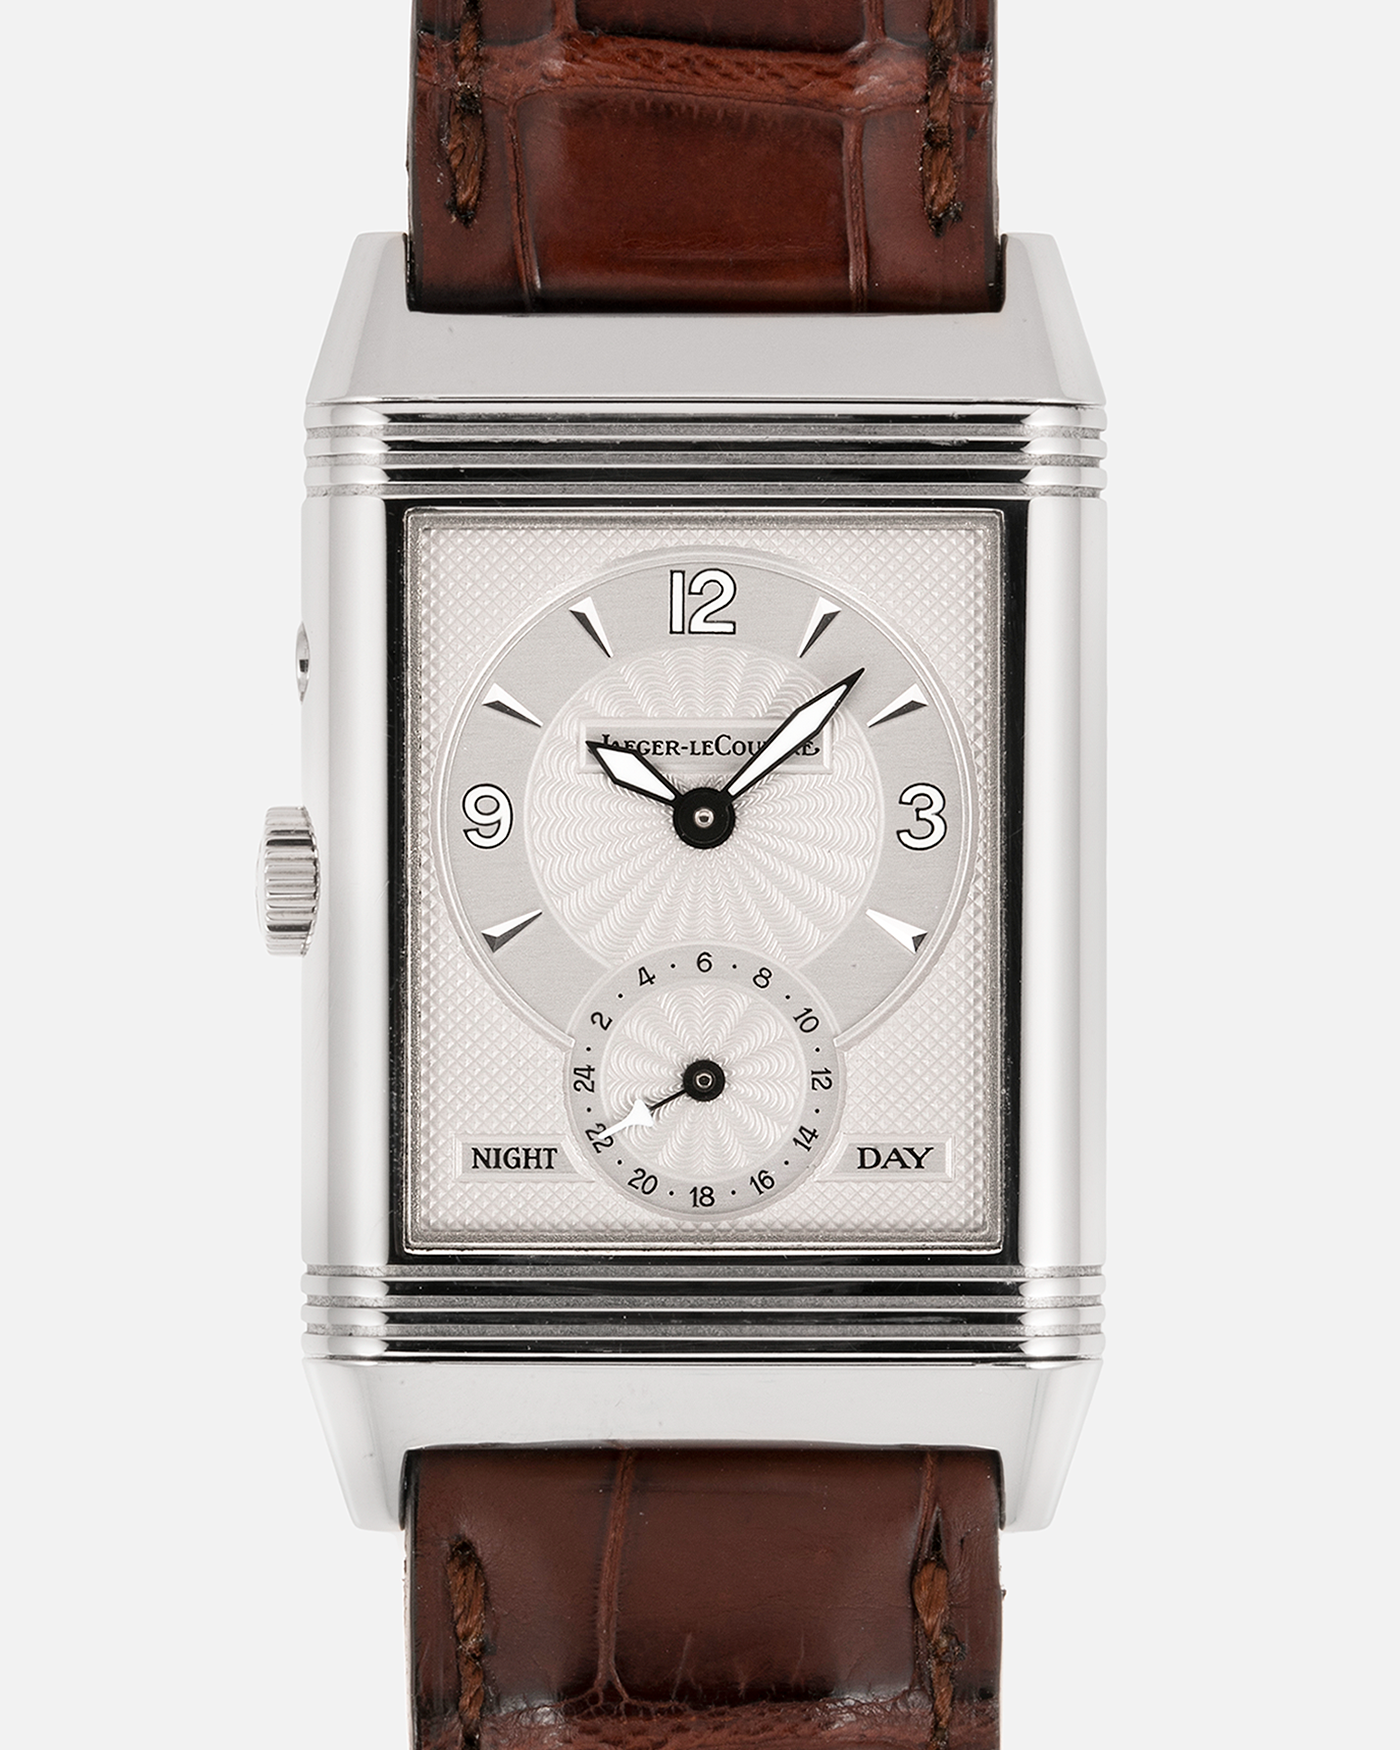 Brand: Jaeger-LeCoultre Year: 2000’s Model: Reverso Duo Night and Day Reference Number: 270.3.54 Material: 18-carat White Gold Movement: JLC Cal. 854, Manual-Wind Case Diameter: 42mm x 26mm Bracelet/Strap: Jaeger LeCoultre Brown Alligator Leather Strap with Signed 18-carat White Gold Deployant Clasp